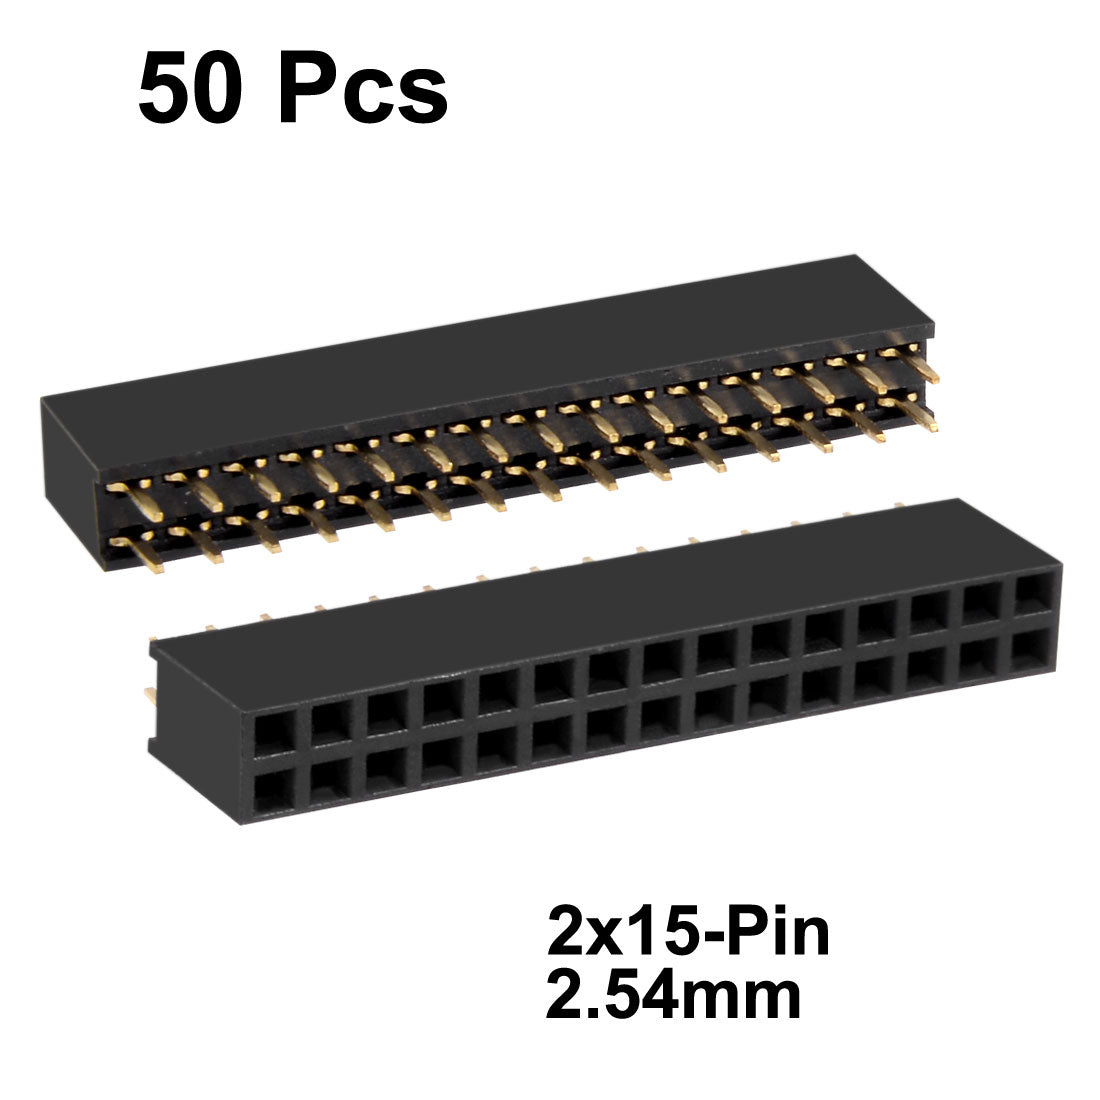 uxcell Uxcell 50Pcs 2.54mm Pitch 2x15-Pin Double Row Straight Connector Female Pin Header Strip PCB Board Socket